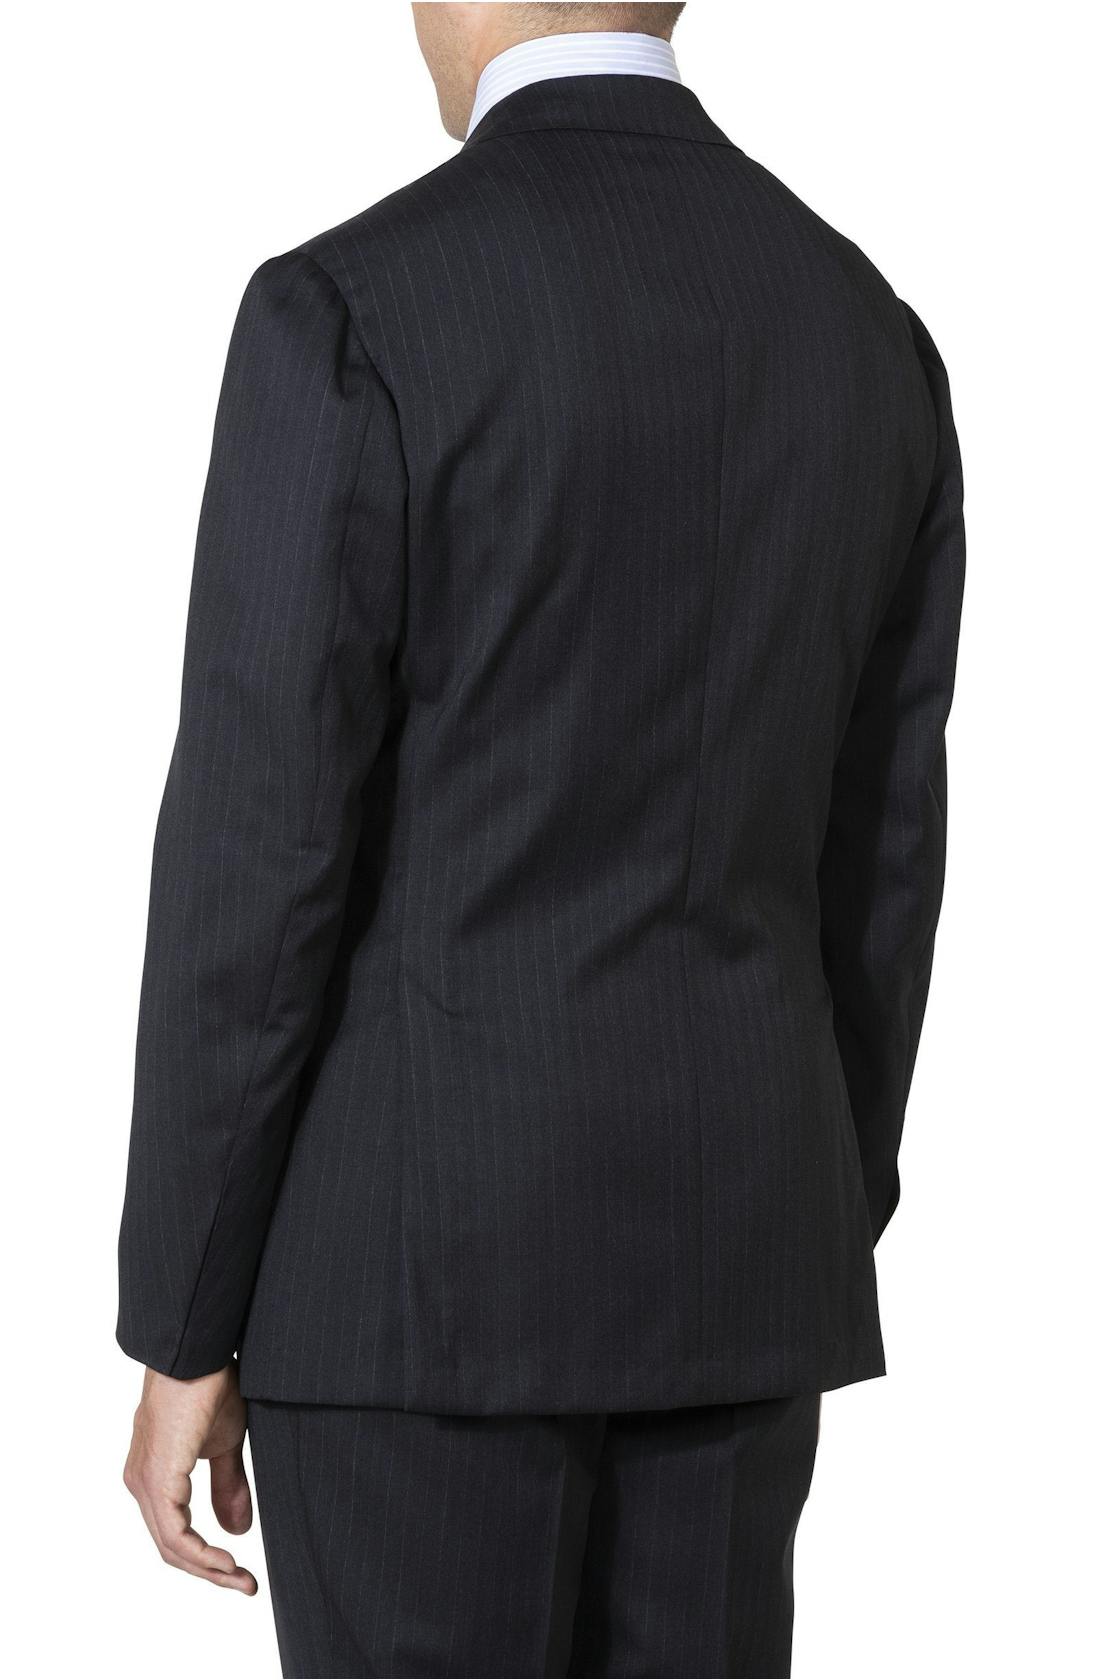 The Armoury by Ring Jacket Model 3A Charcoal Wool Fine Stripe Suit